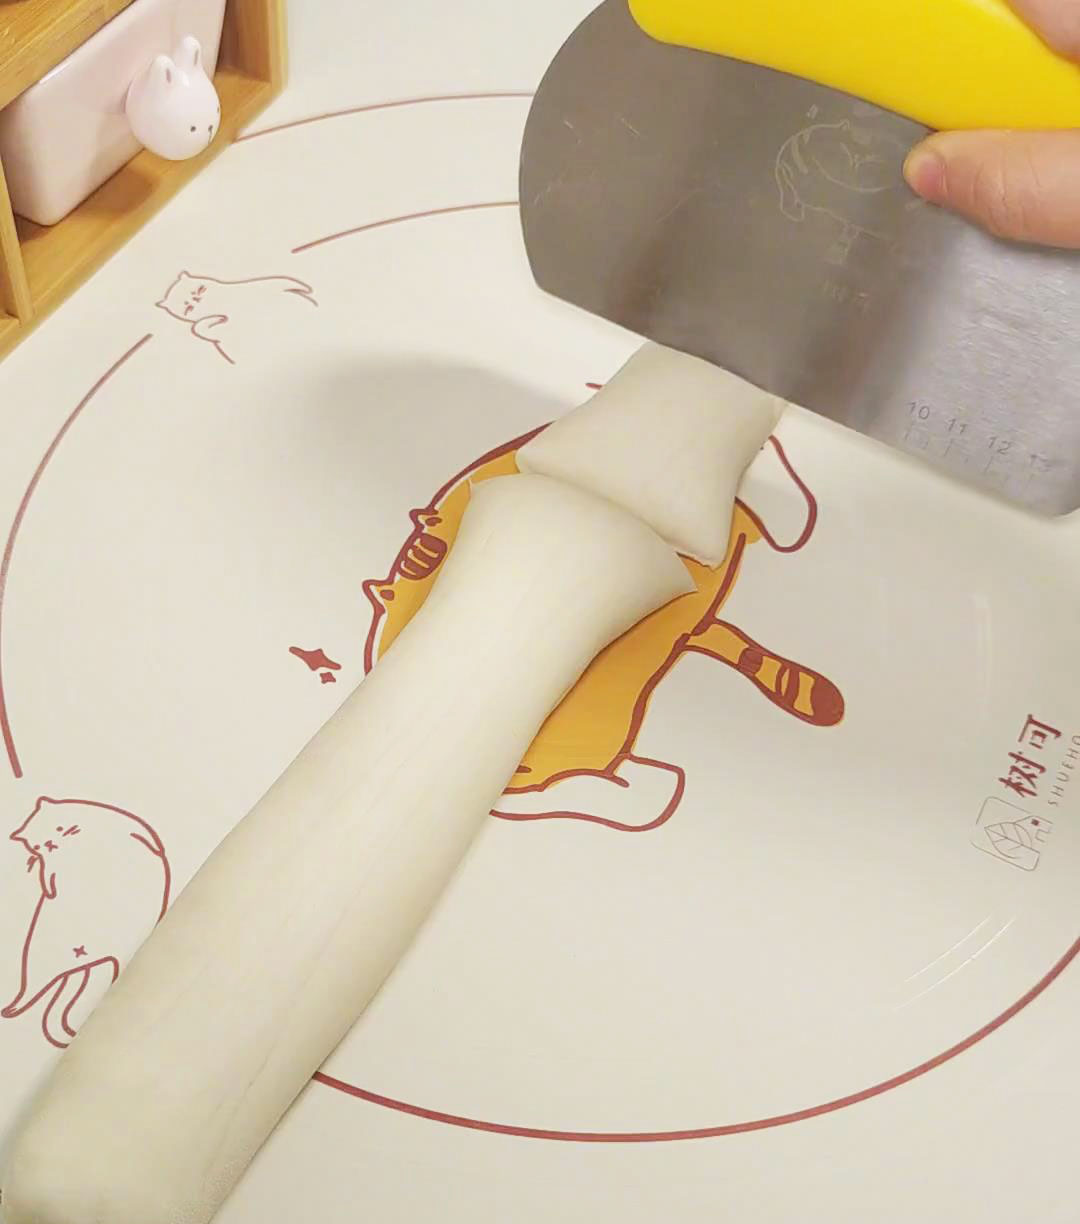 divide the dough into 48g portions using a dough cutter